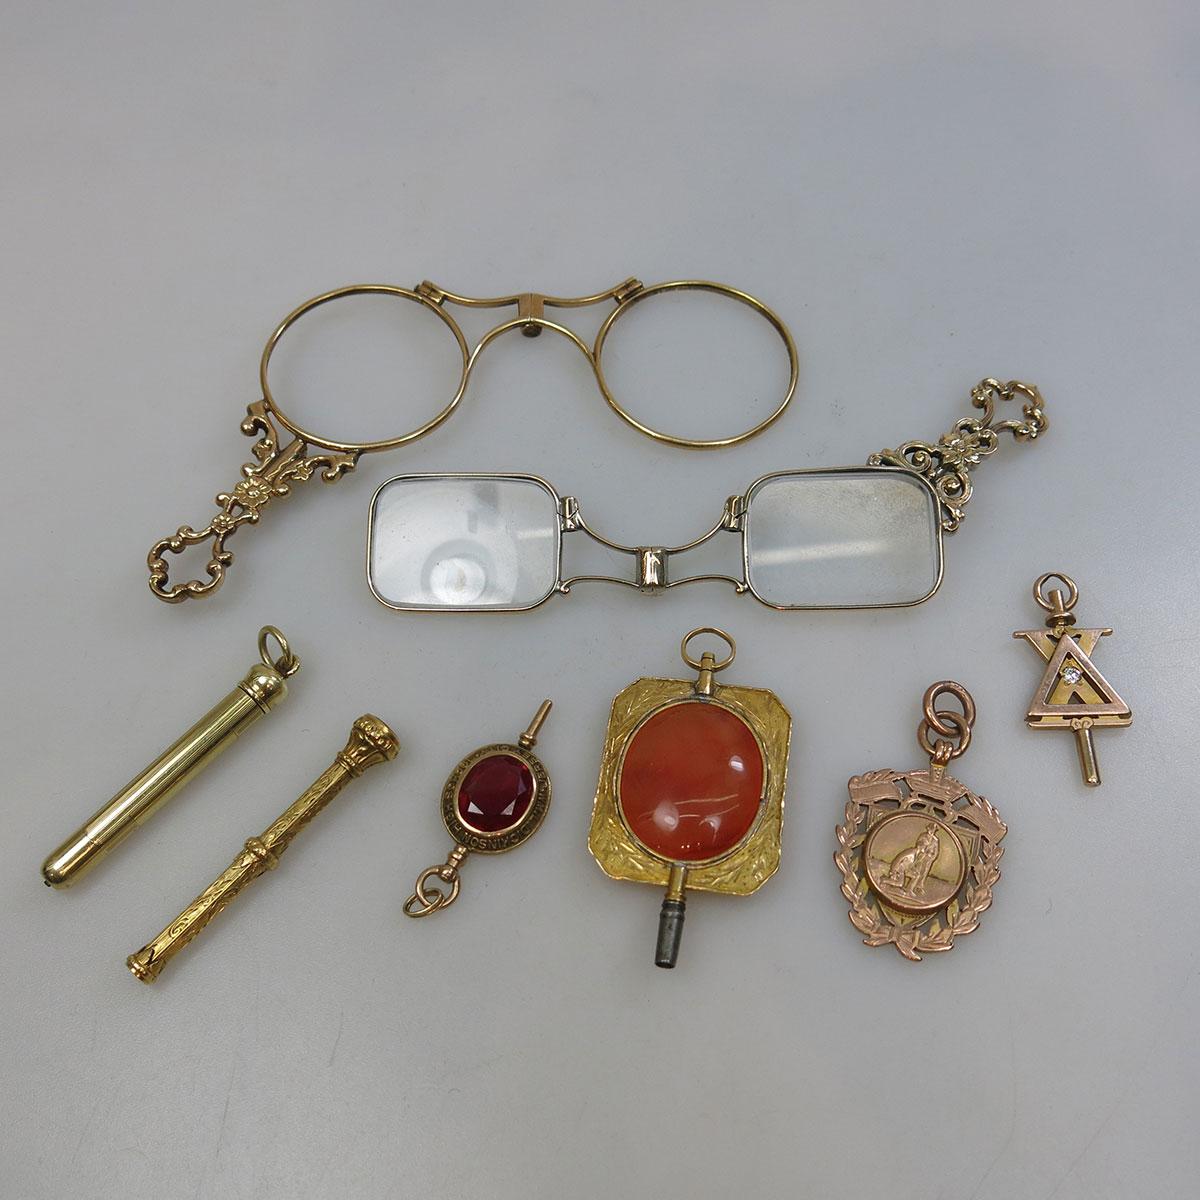 Small Quantity Of Gold Jewellery And Accessories